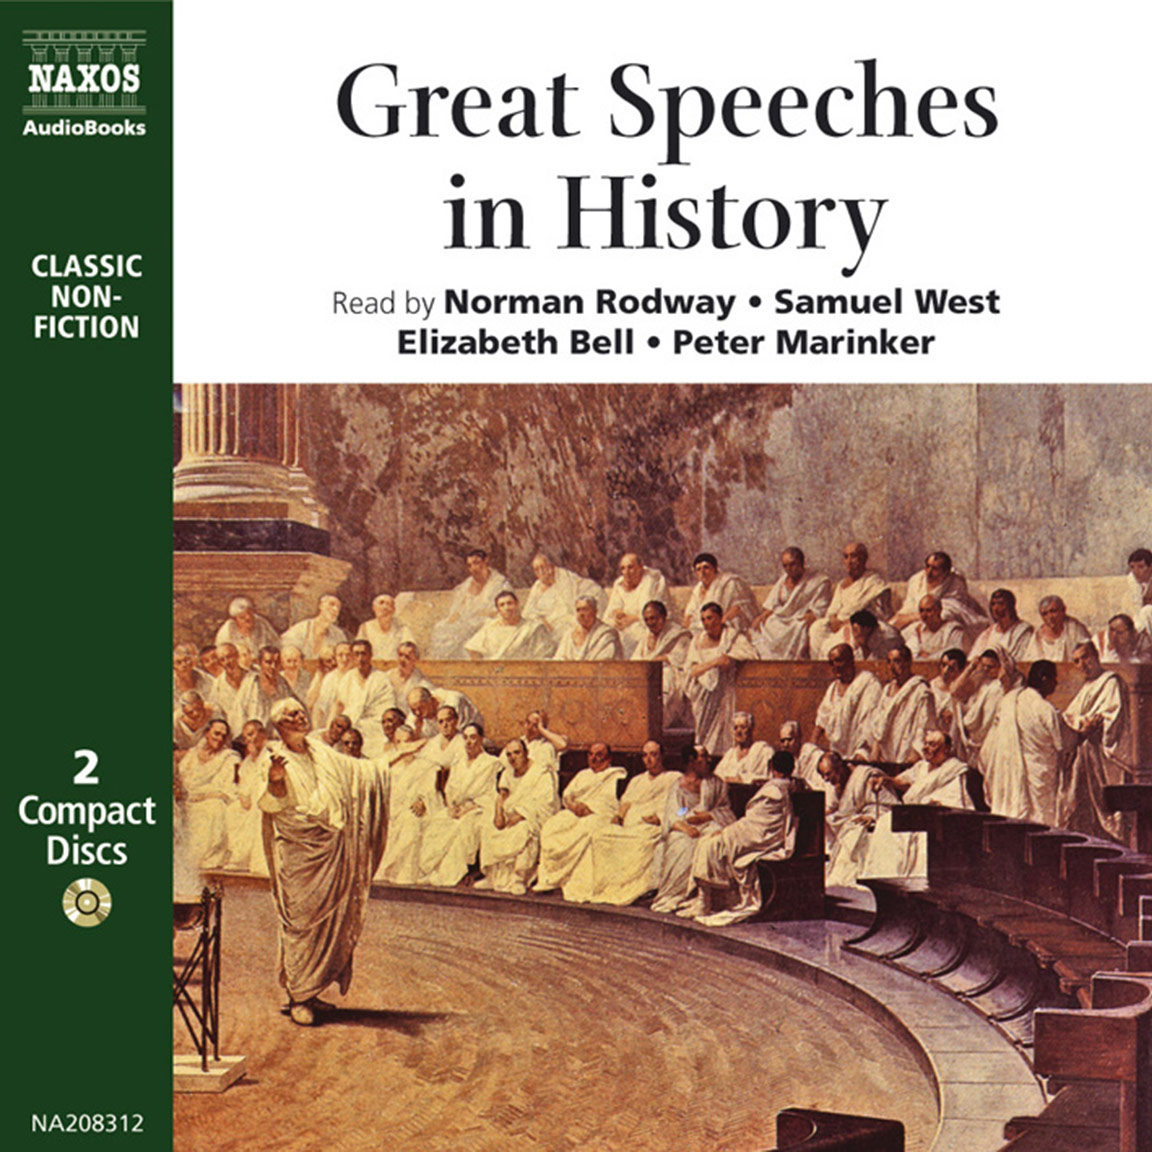 Great Speeches in History (compilation)